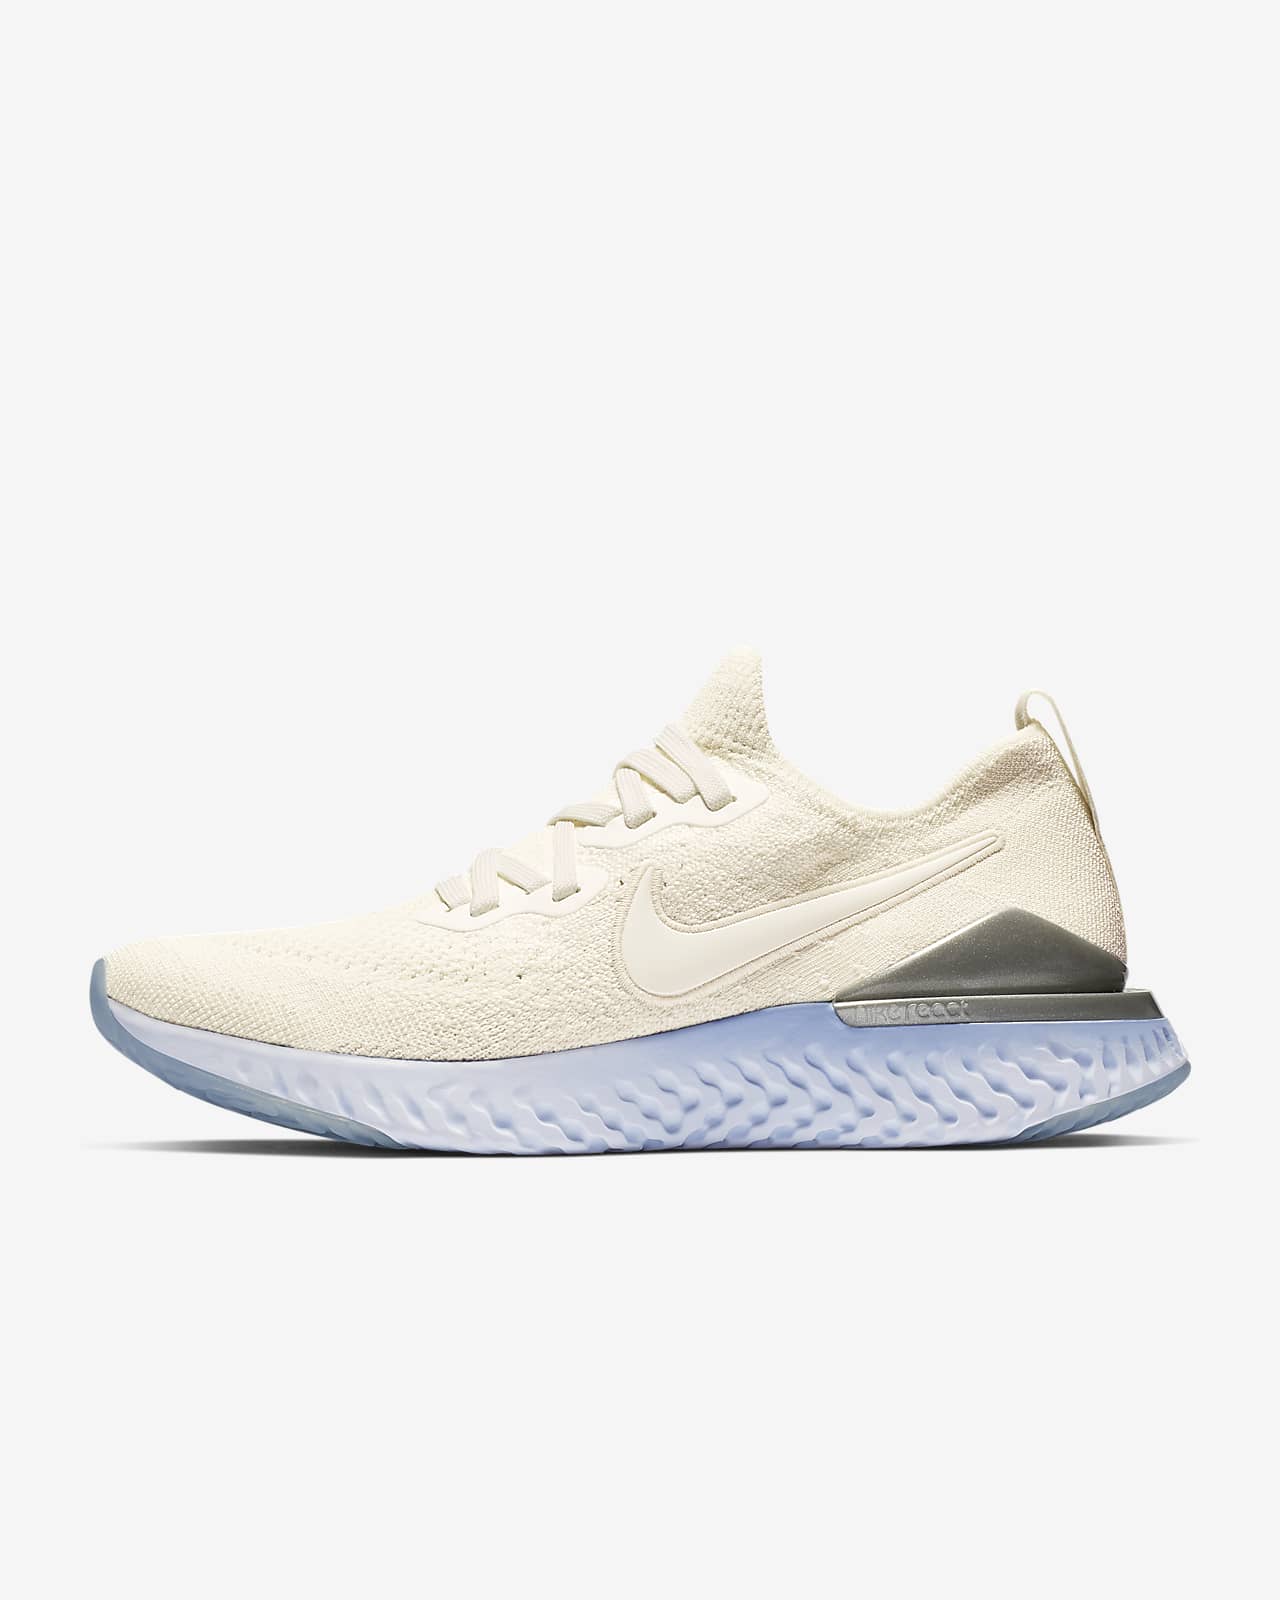 nike epic react femme or cheap buy online